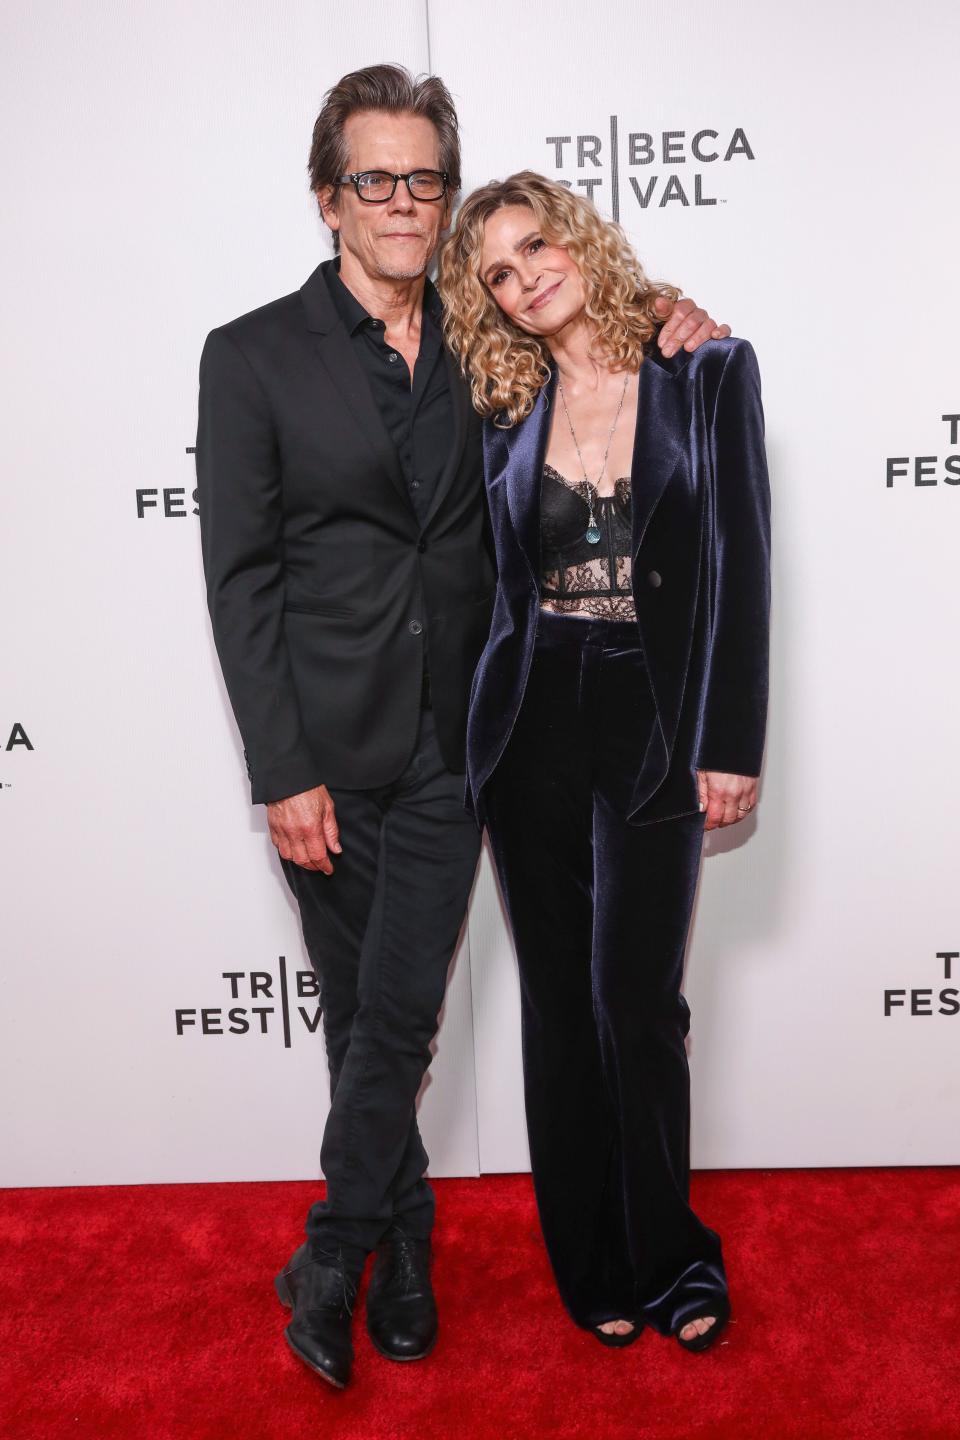 Kevin Bacon and Kyra Sedgwick recreated a viral "Footloose" TikTok trend.